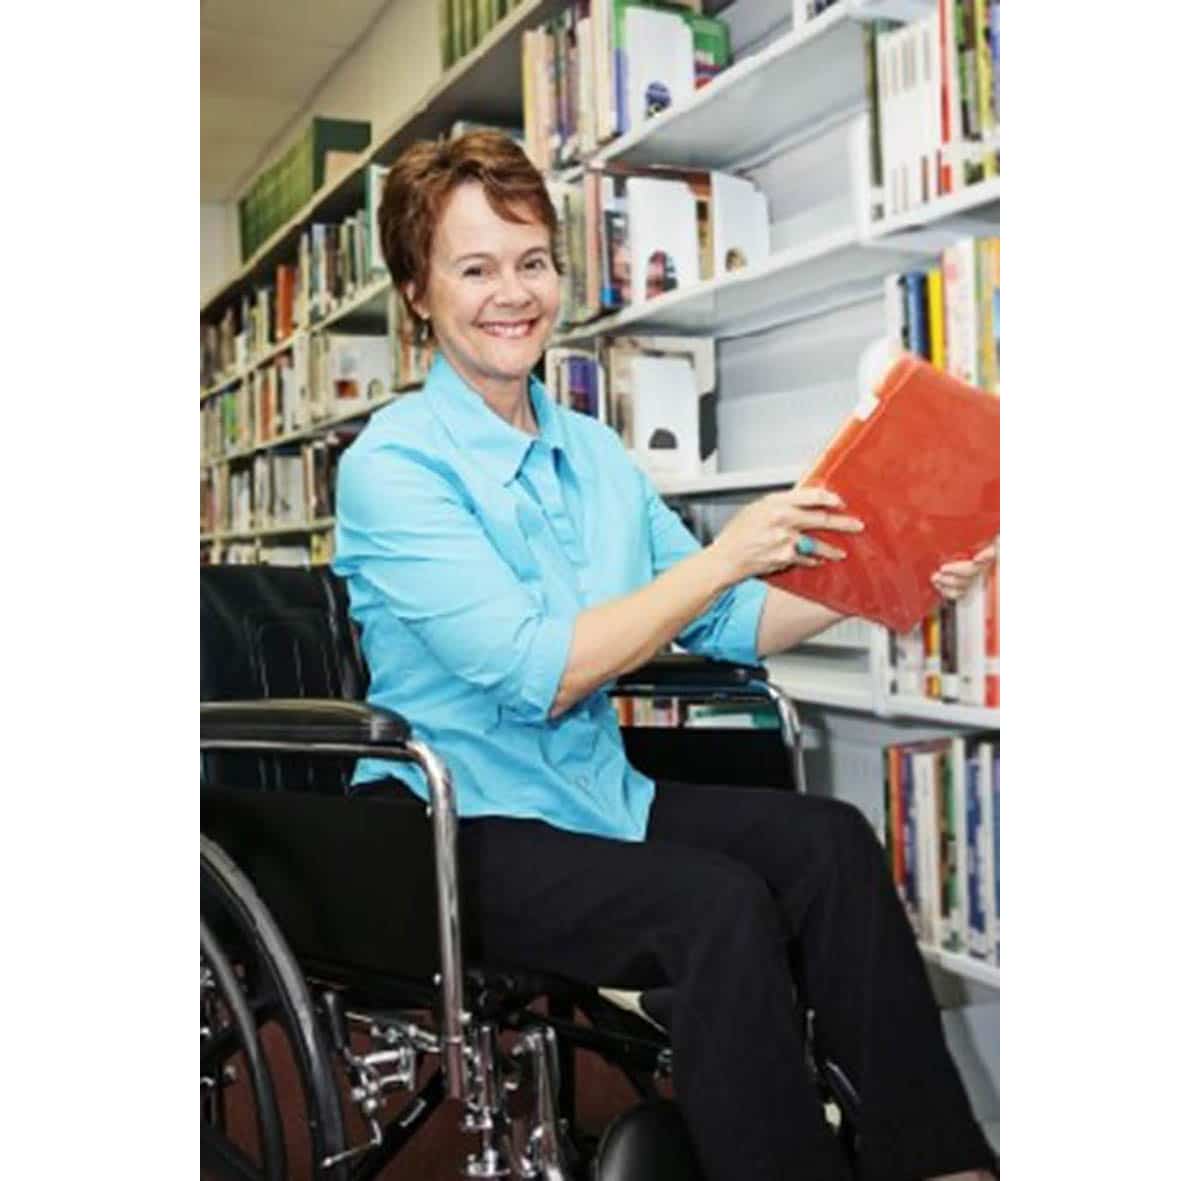 Top Jobs for Disabled Individuals